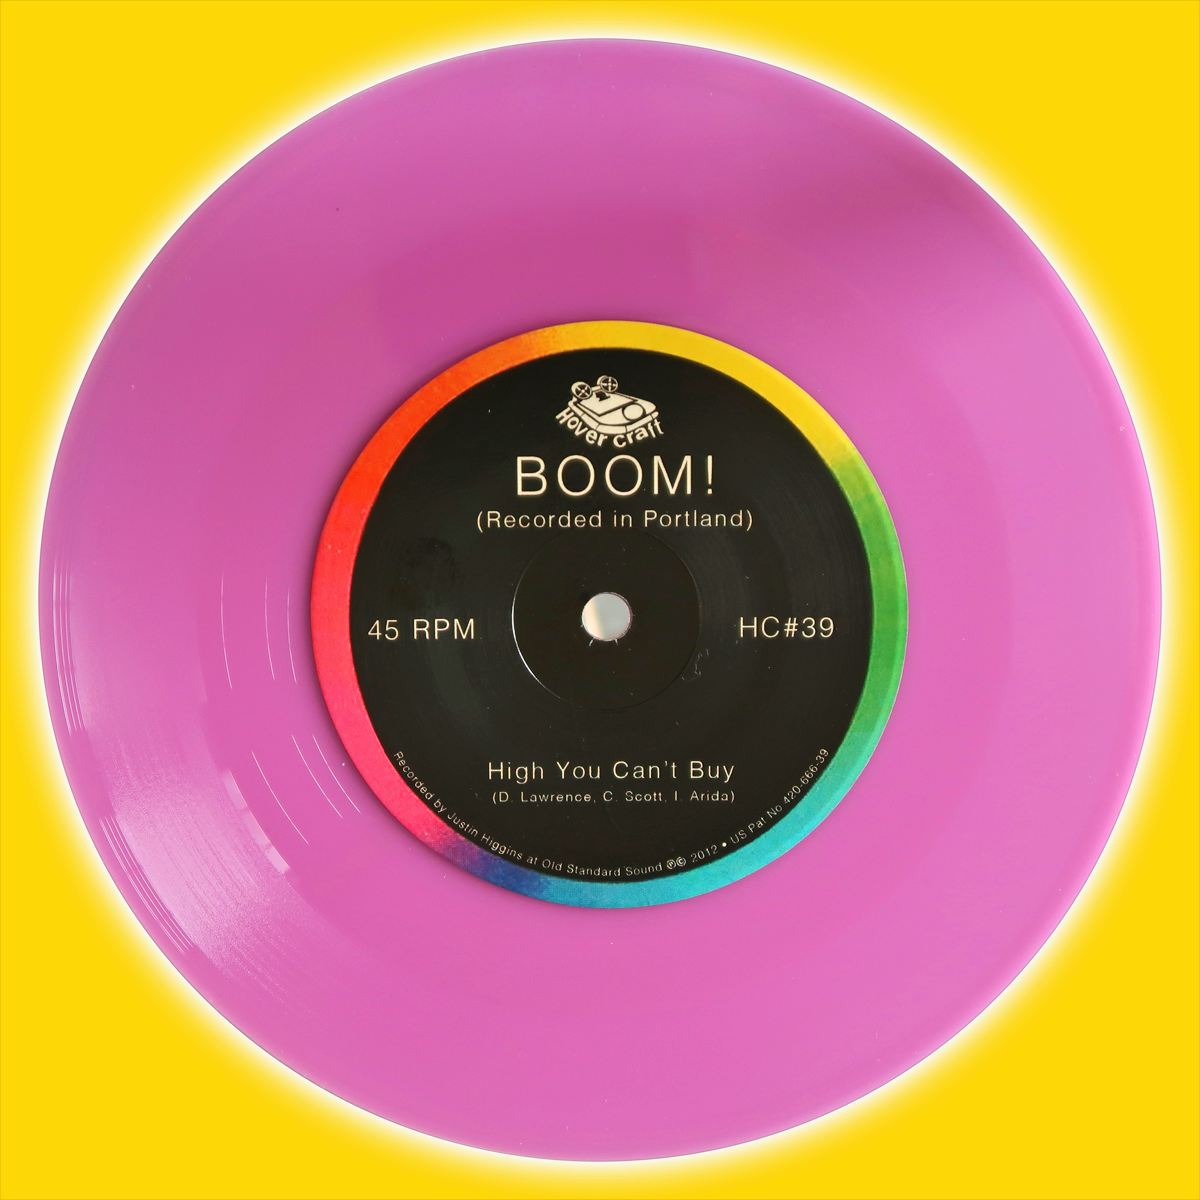 BOOM! - High You Can't Buy 7" ~RARE LAVENDAR COLORED WAX!